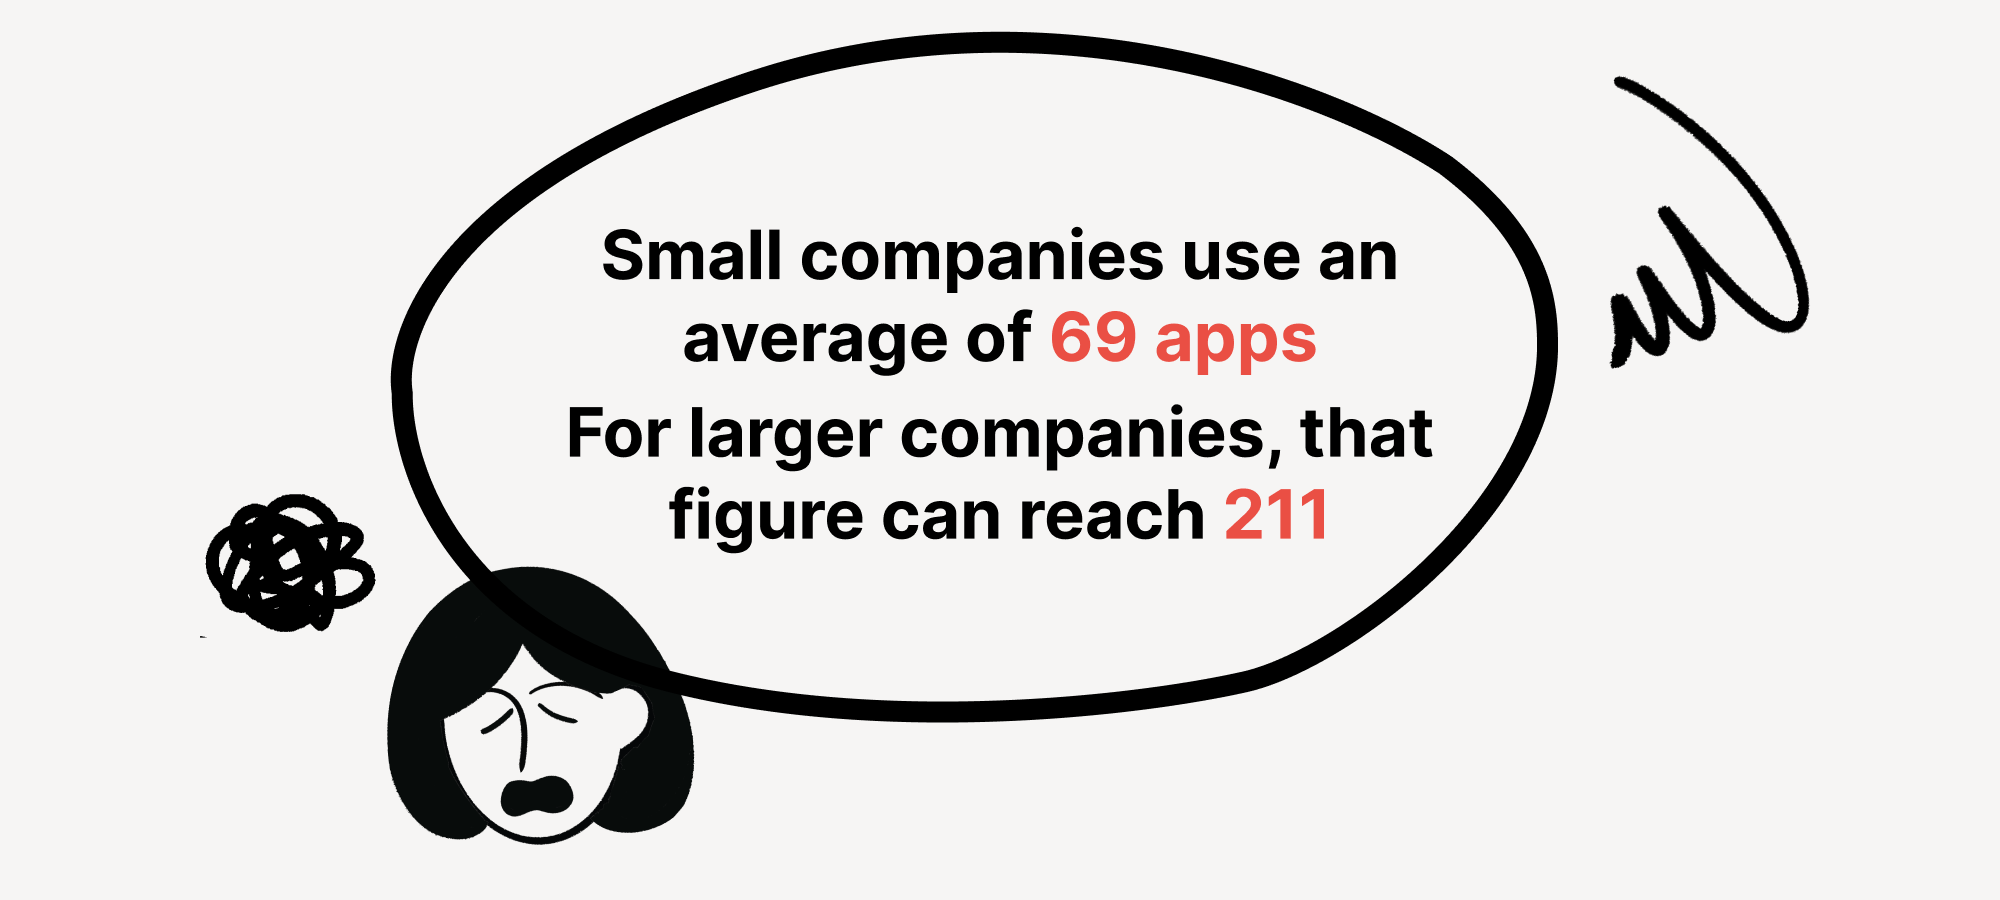 Companies use a lot of apps. Employees usually aren't happy about it. 